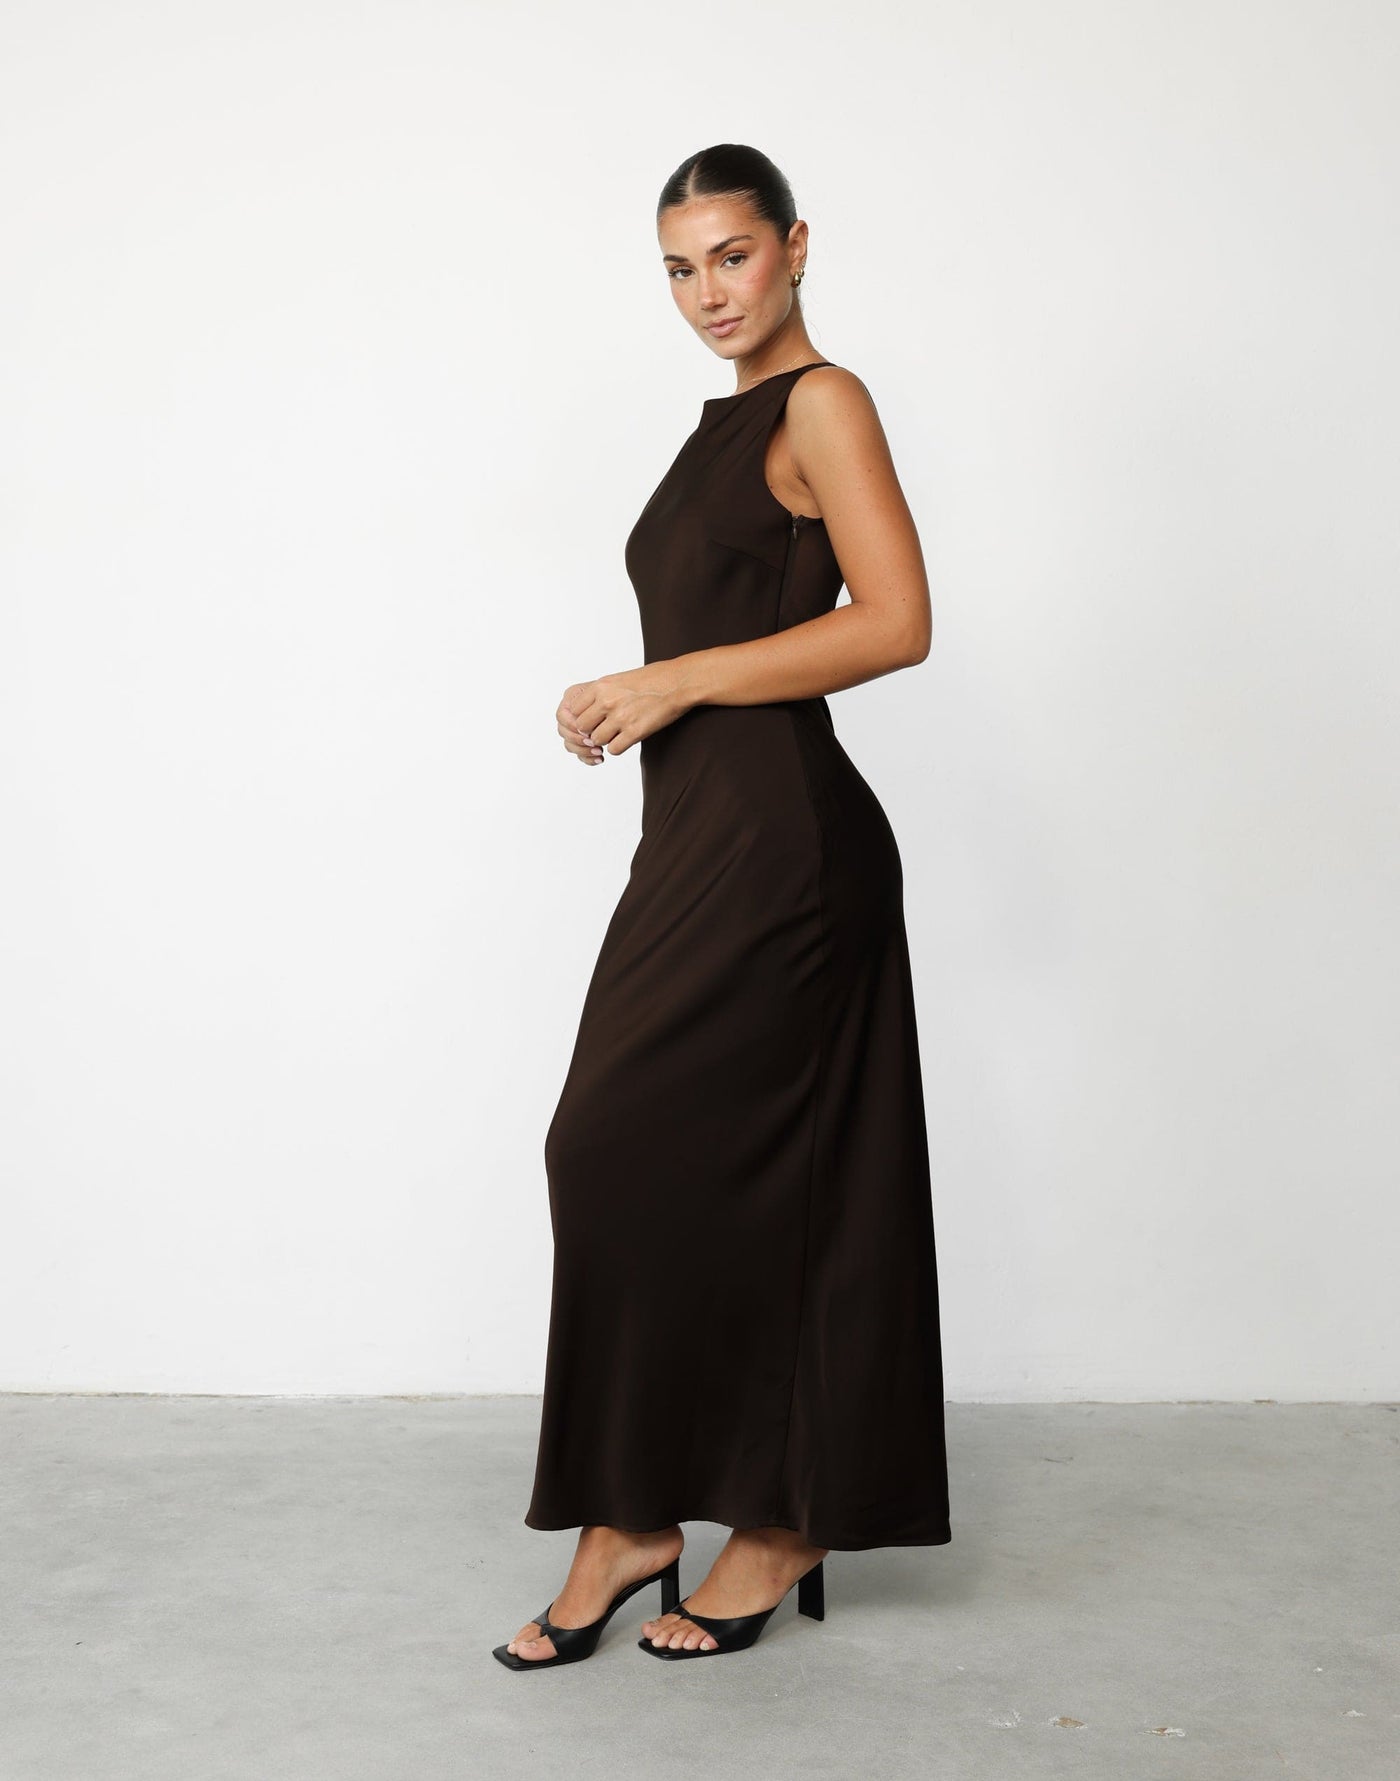 Lucetto Maxi Dress (Chocolate) | CHARCOAL Exclusive - Sheer Back Satin Maxi Dress - Women's Dress - Charcoal Clothing